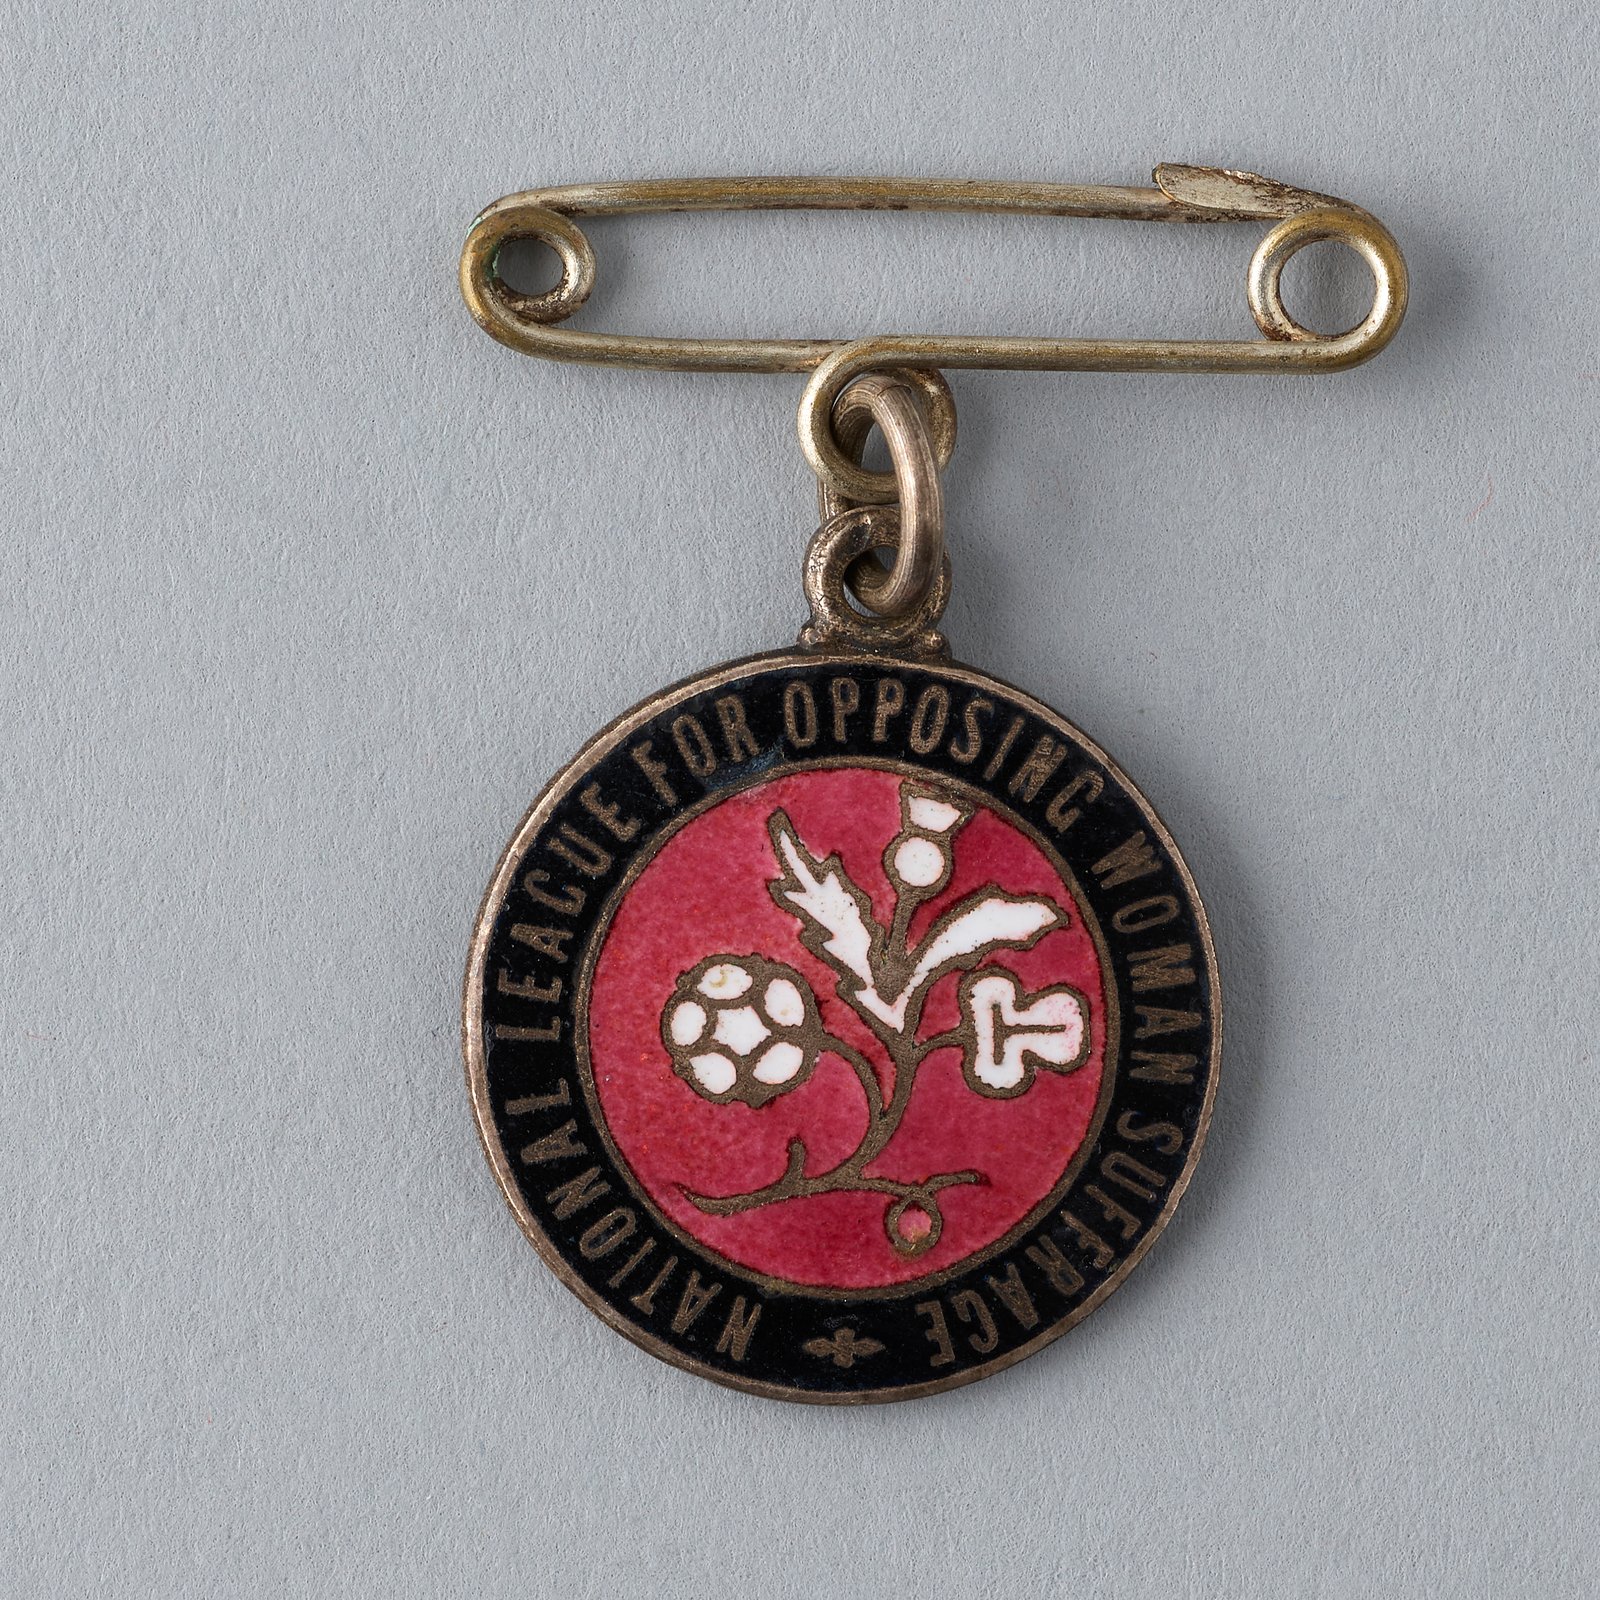 National League for Opposing Woman Suffrage badge